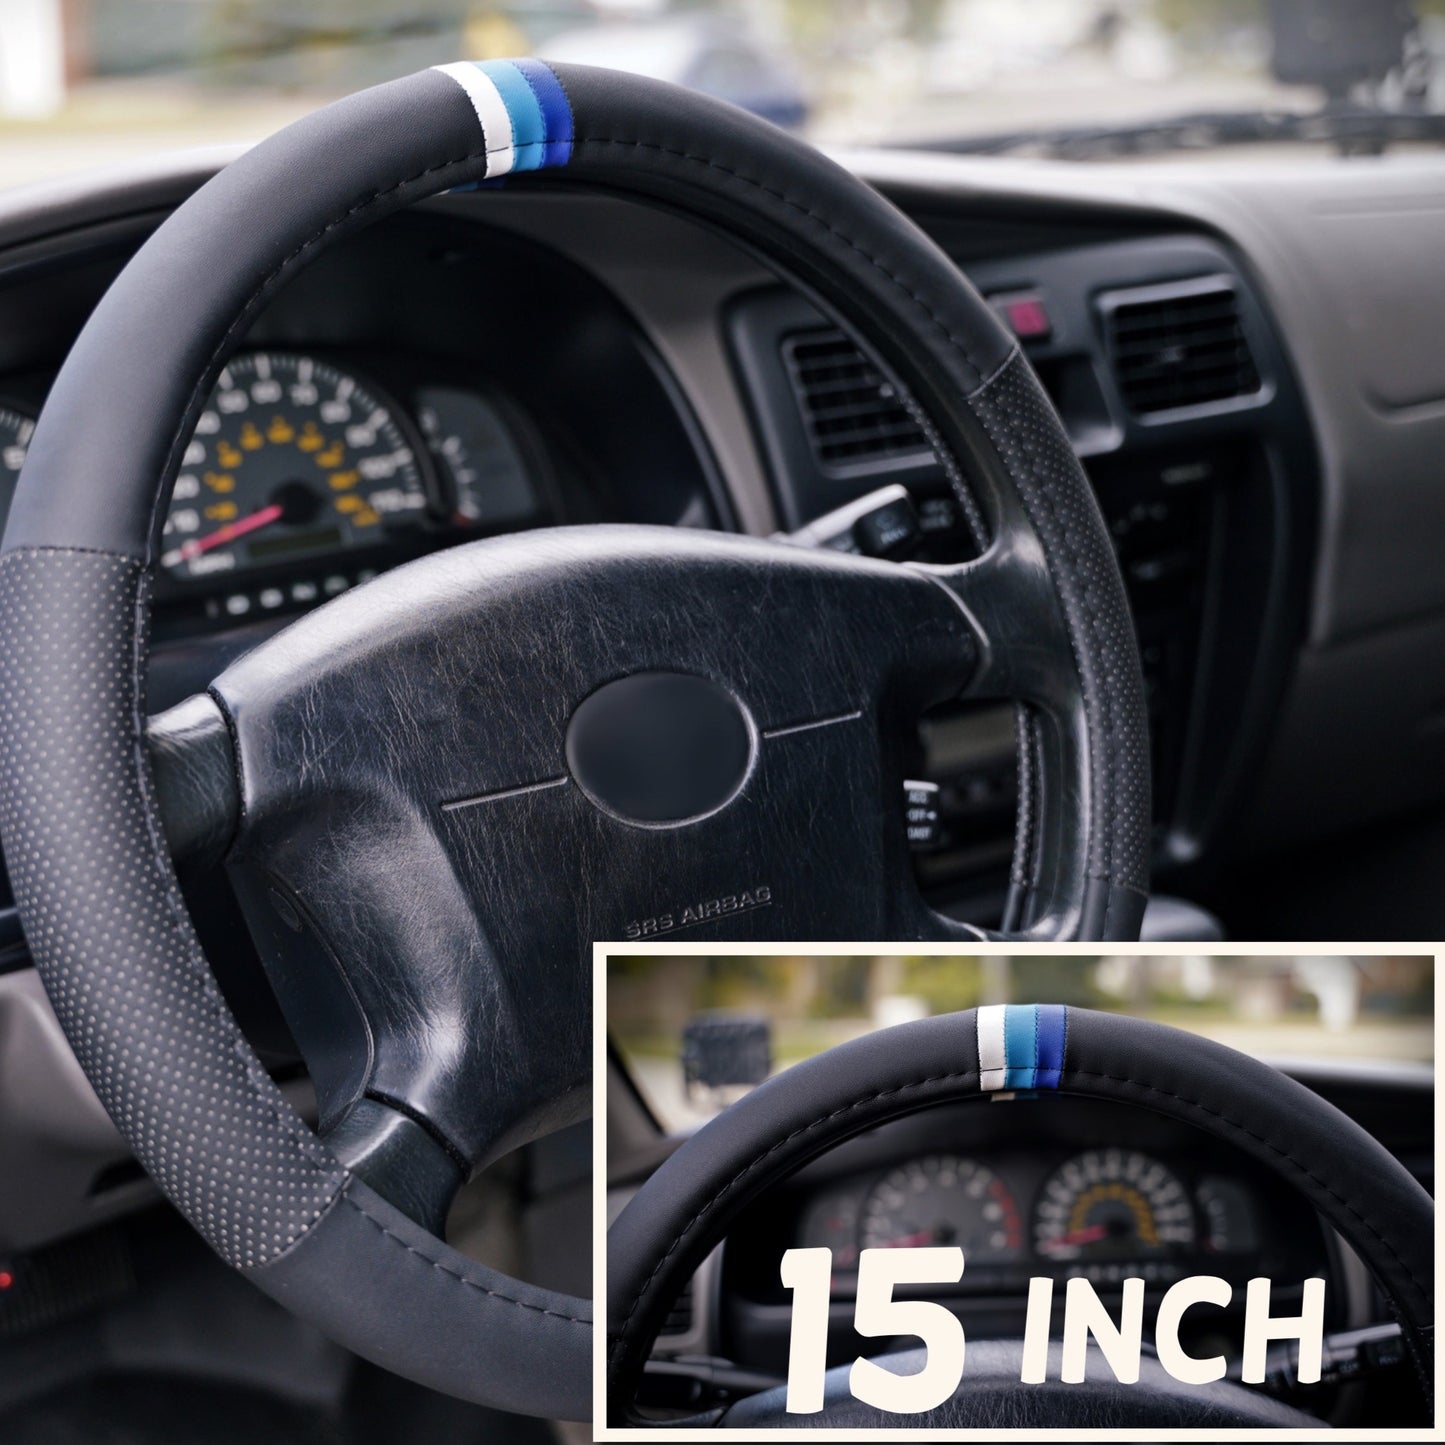 Blue Retro Stripes Steering Wheel Cover for Toyota, 15 Inch, Leather